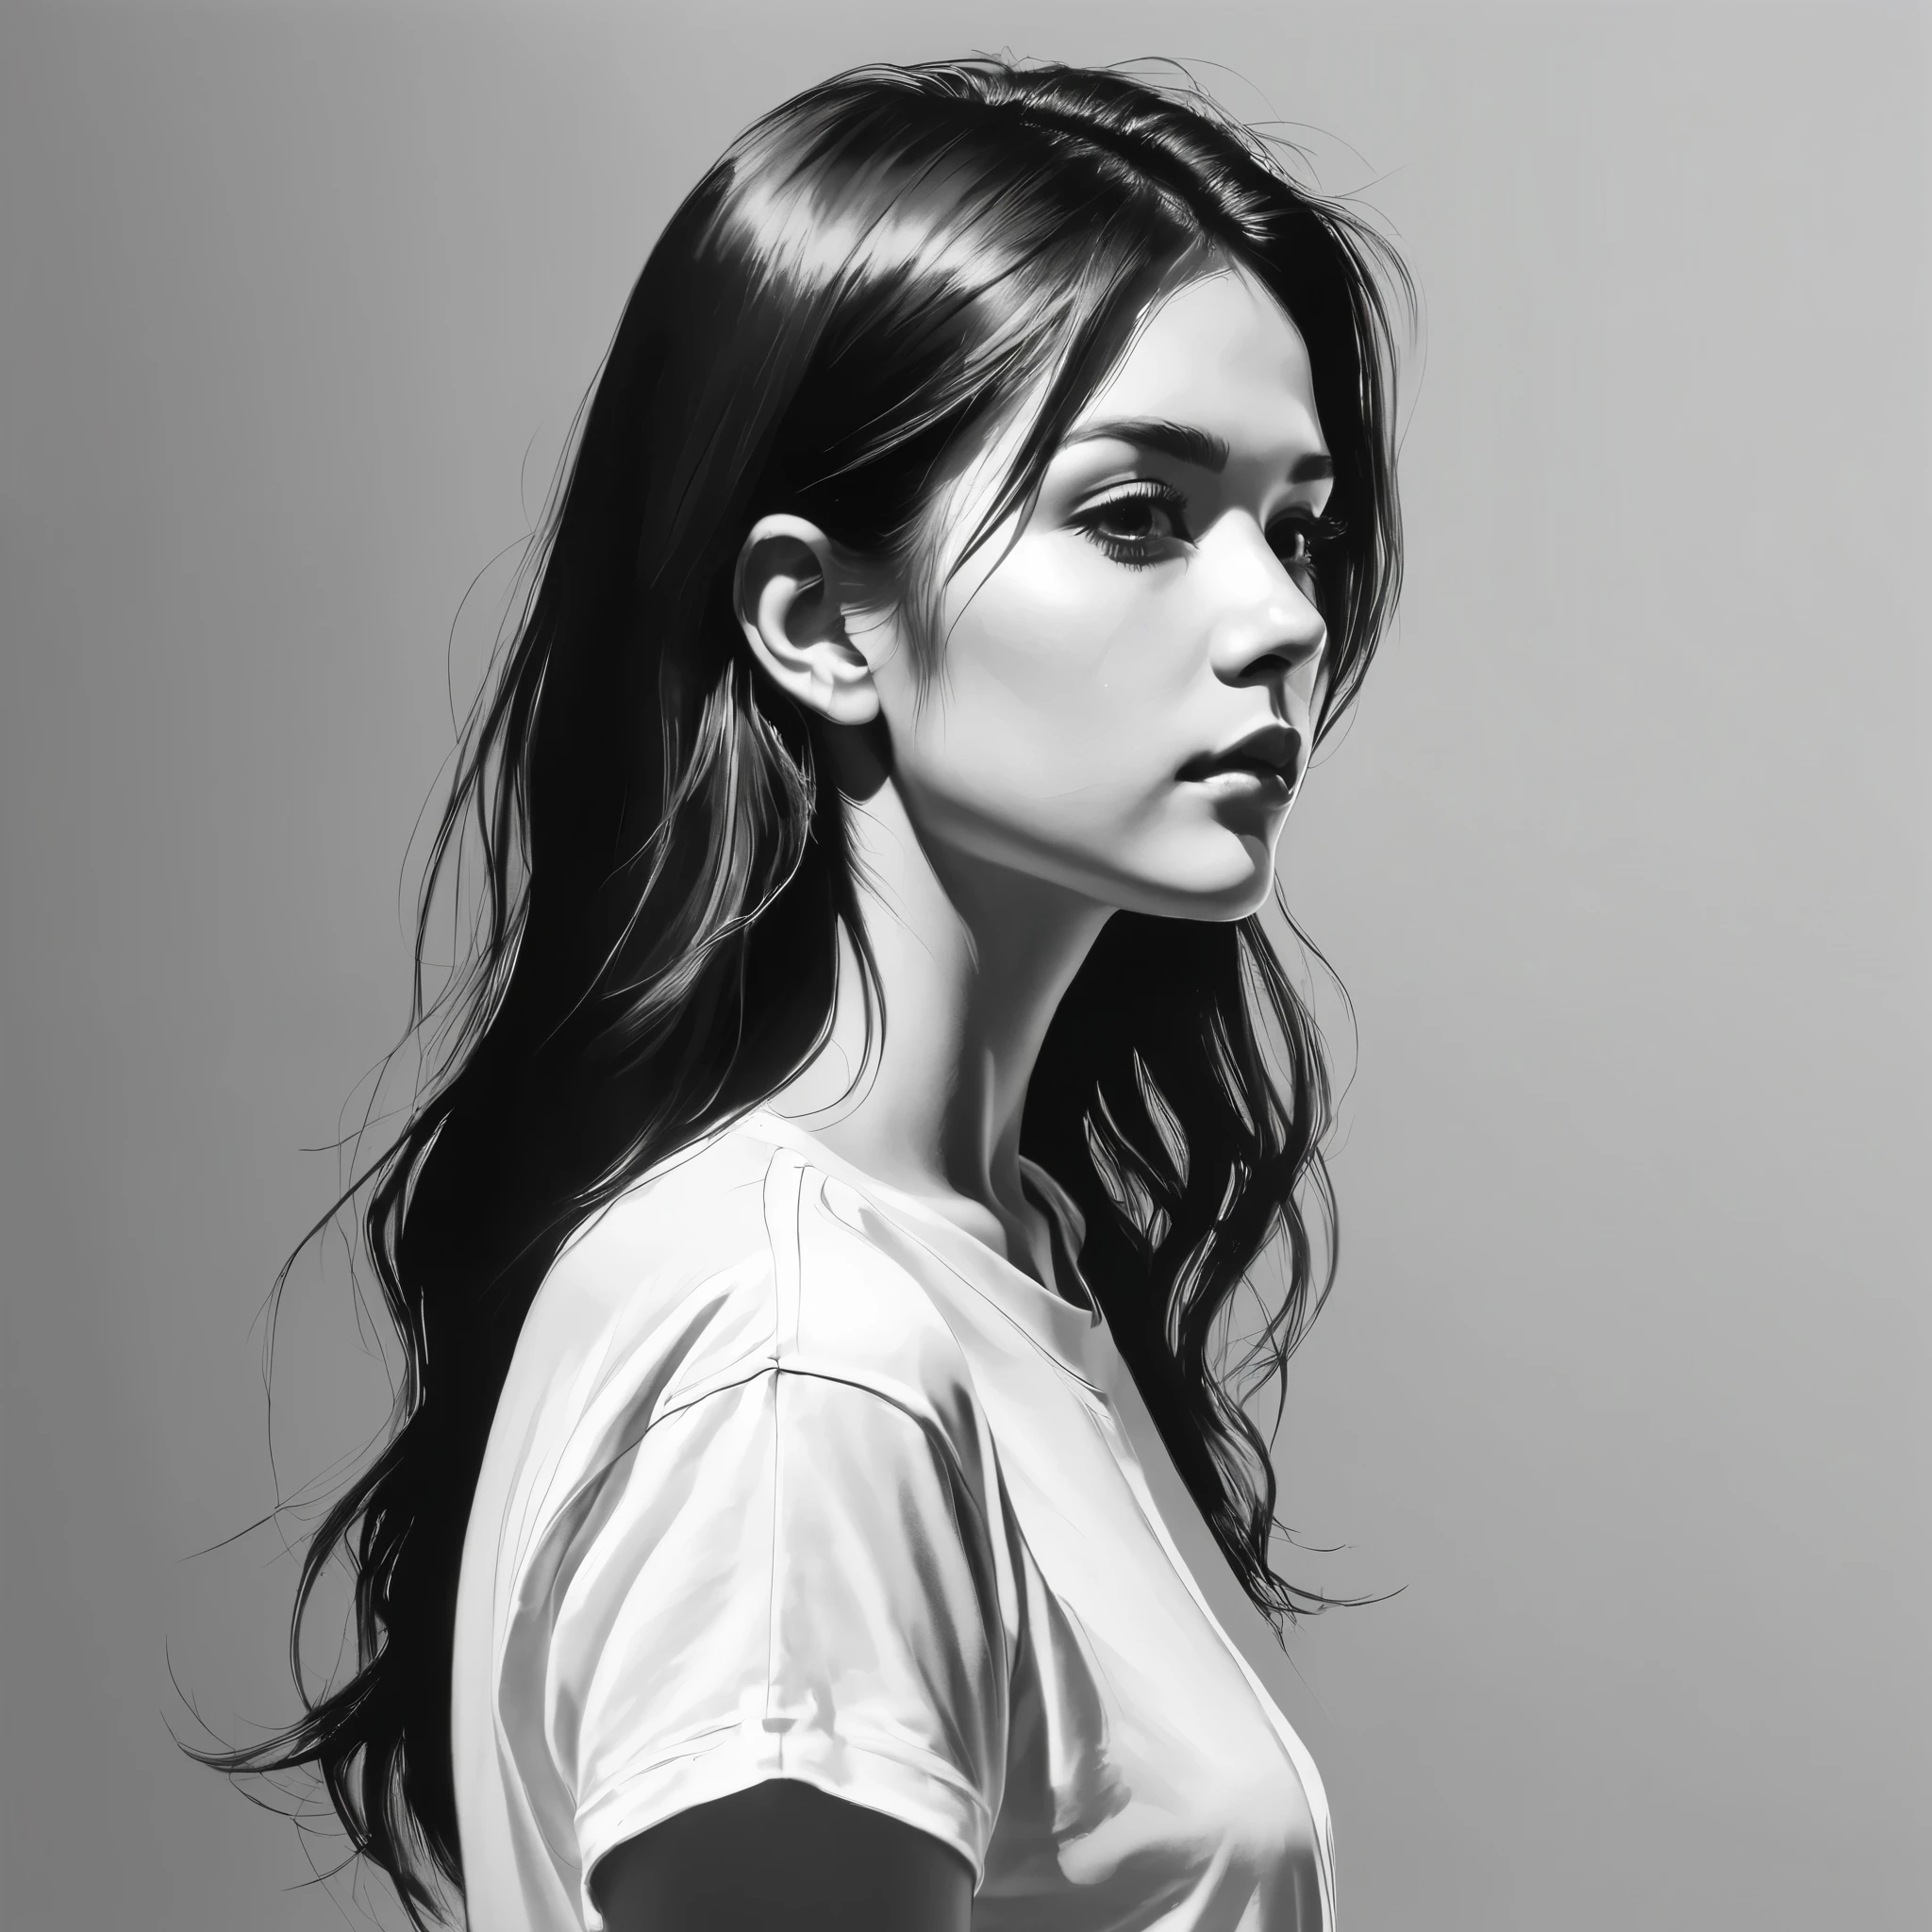 (Minimalism:1.5)，Portraits，(Black and white sketch painting)，Simple composition，1 girl,20 year old girl, There is light on the face, t-shirt，back view，profile